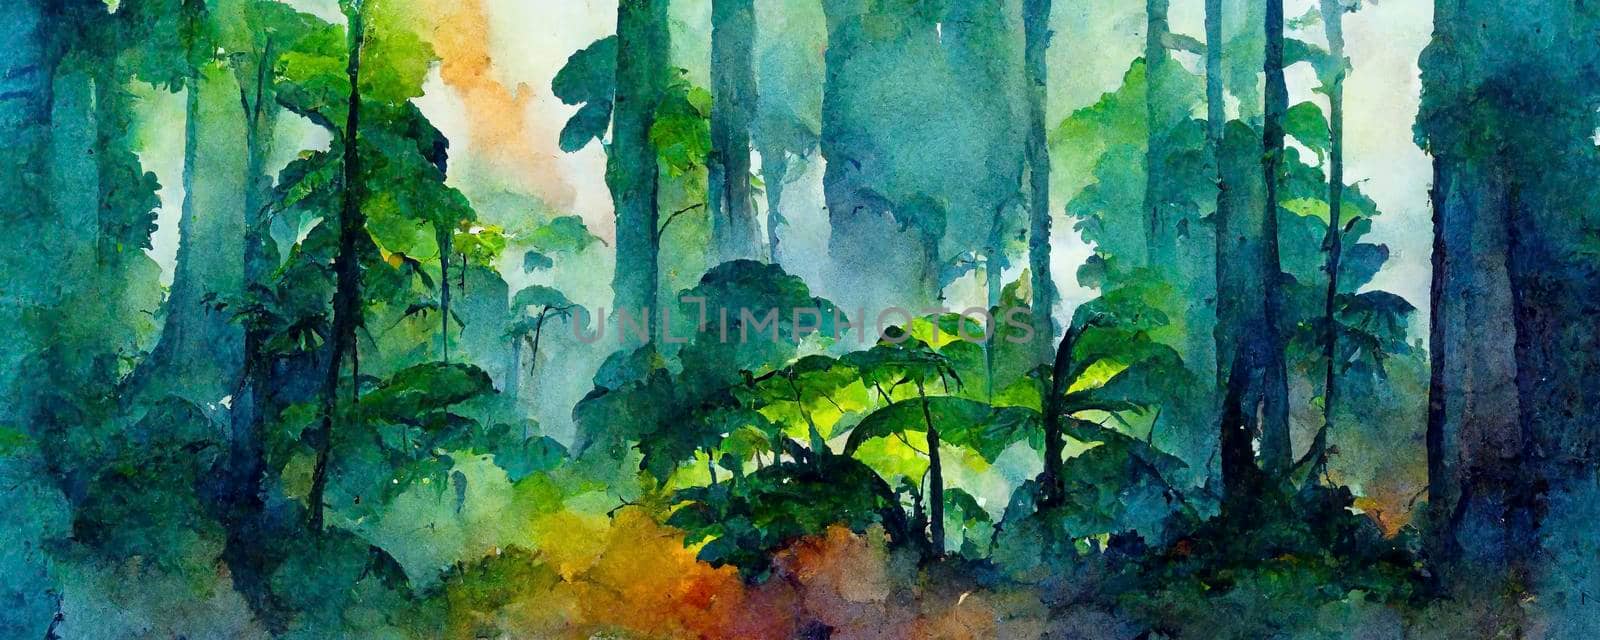 Computer-generated tropical landscape illustration. watercolors, acrylics and ink. CGI